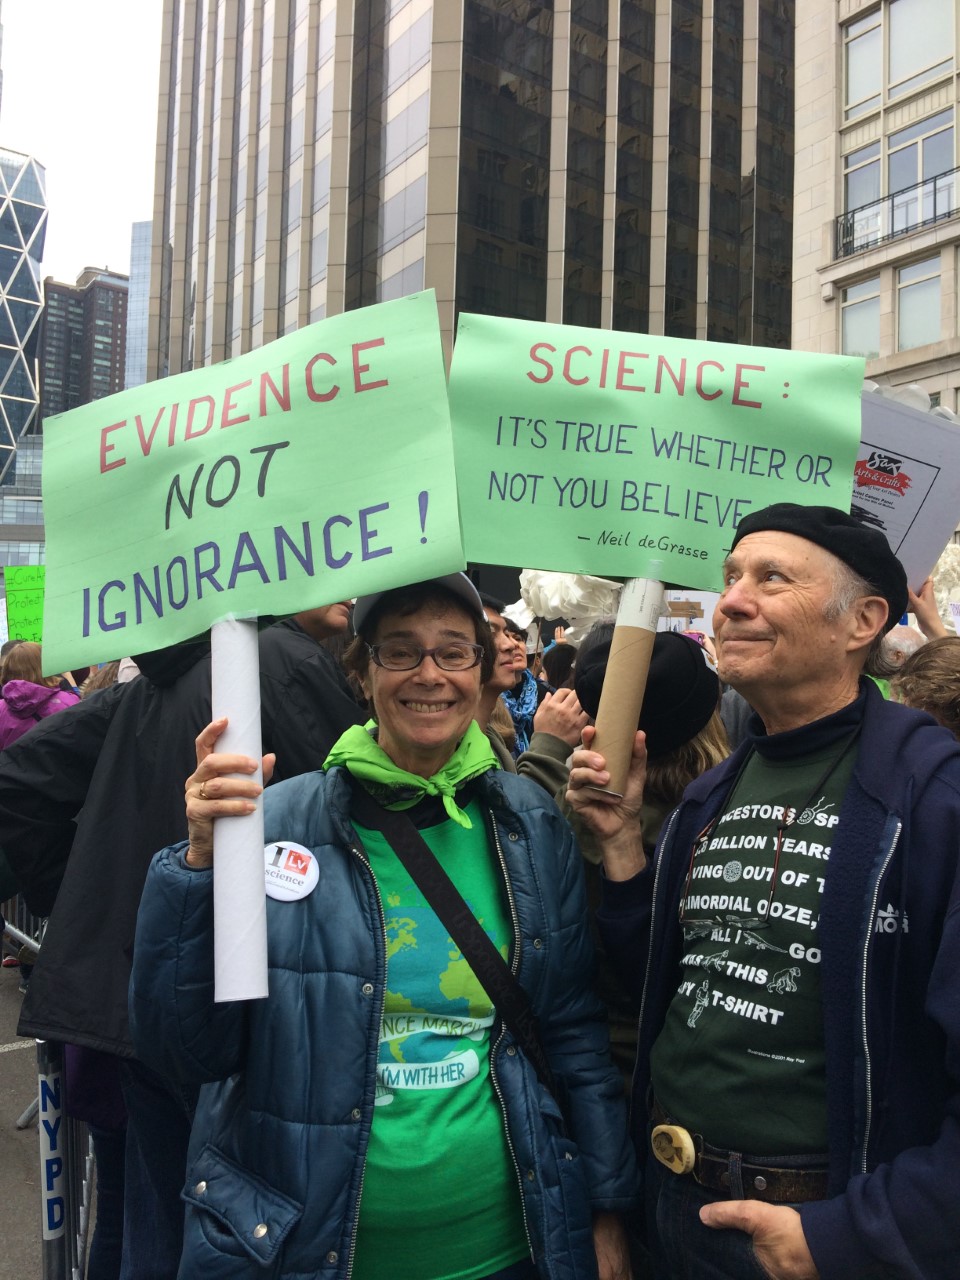 At the March for Science